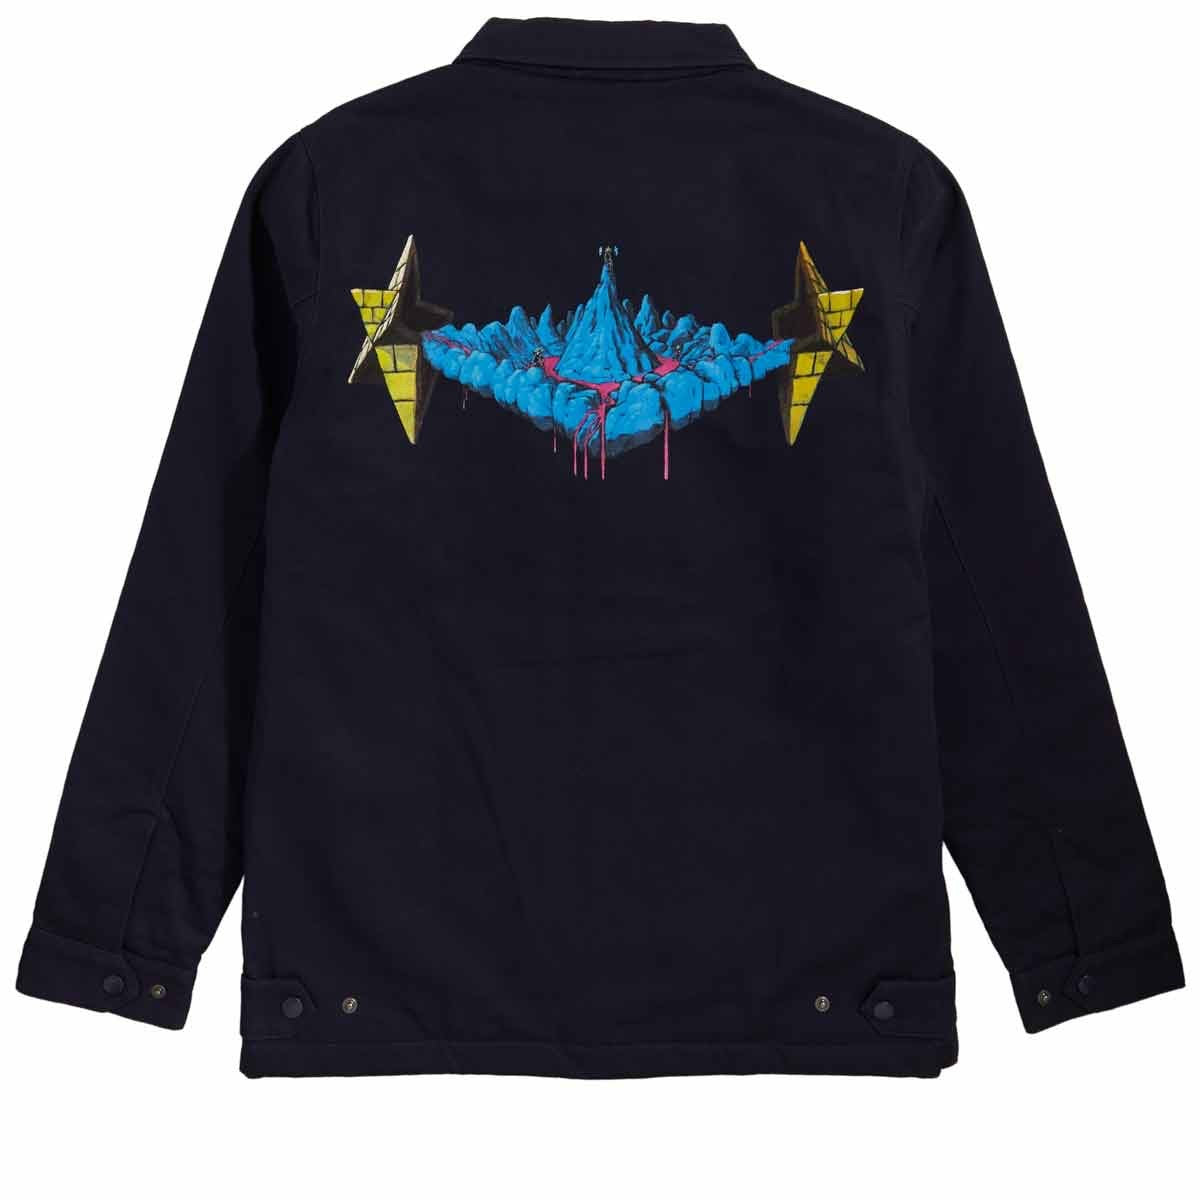 PYRAMID COUNTRY LIGHT AND SOUND JACKET